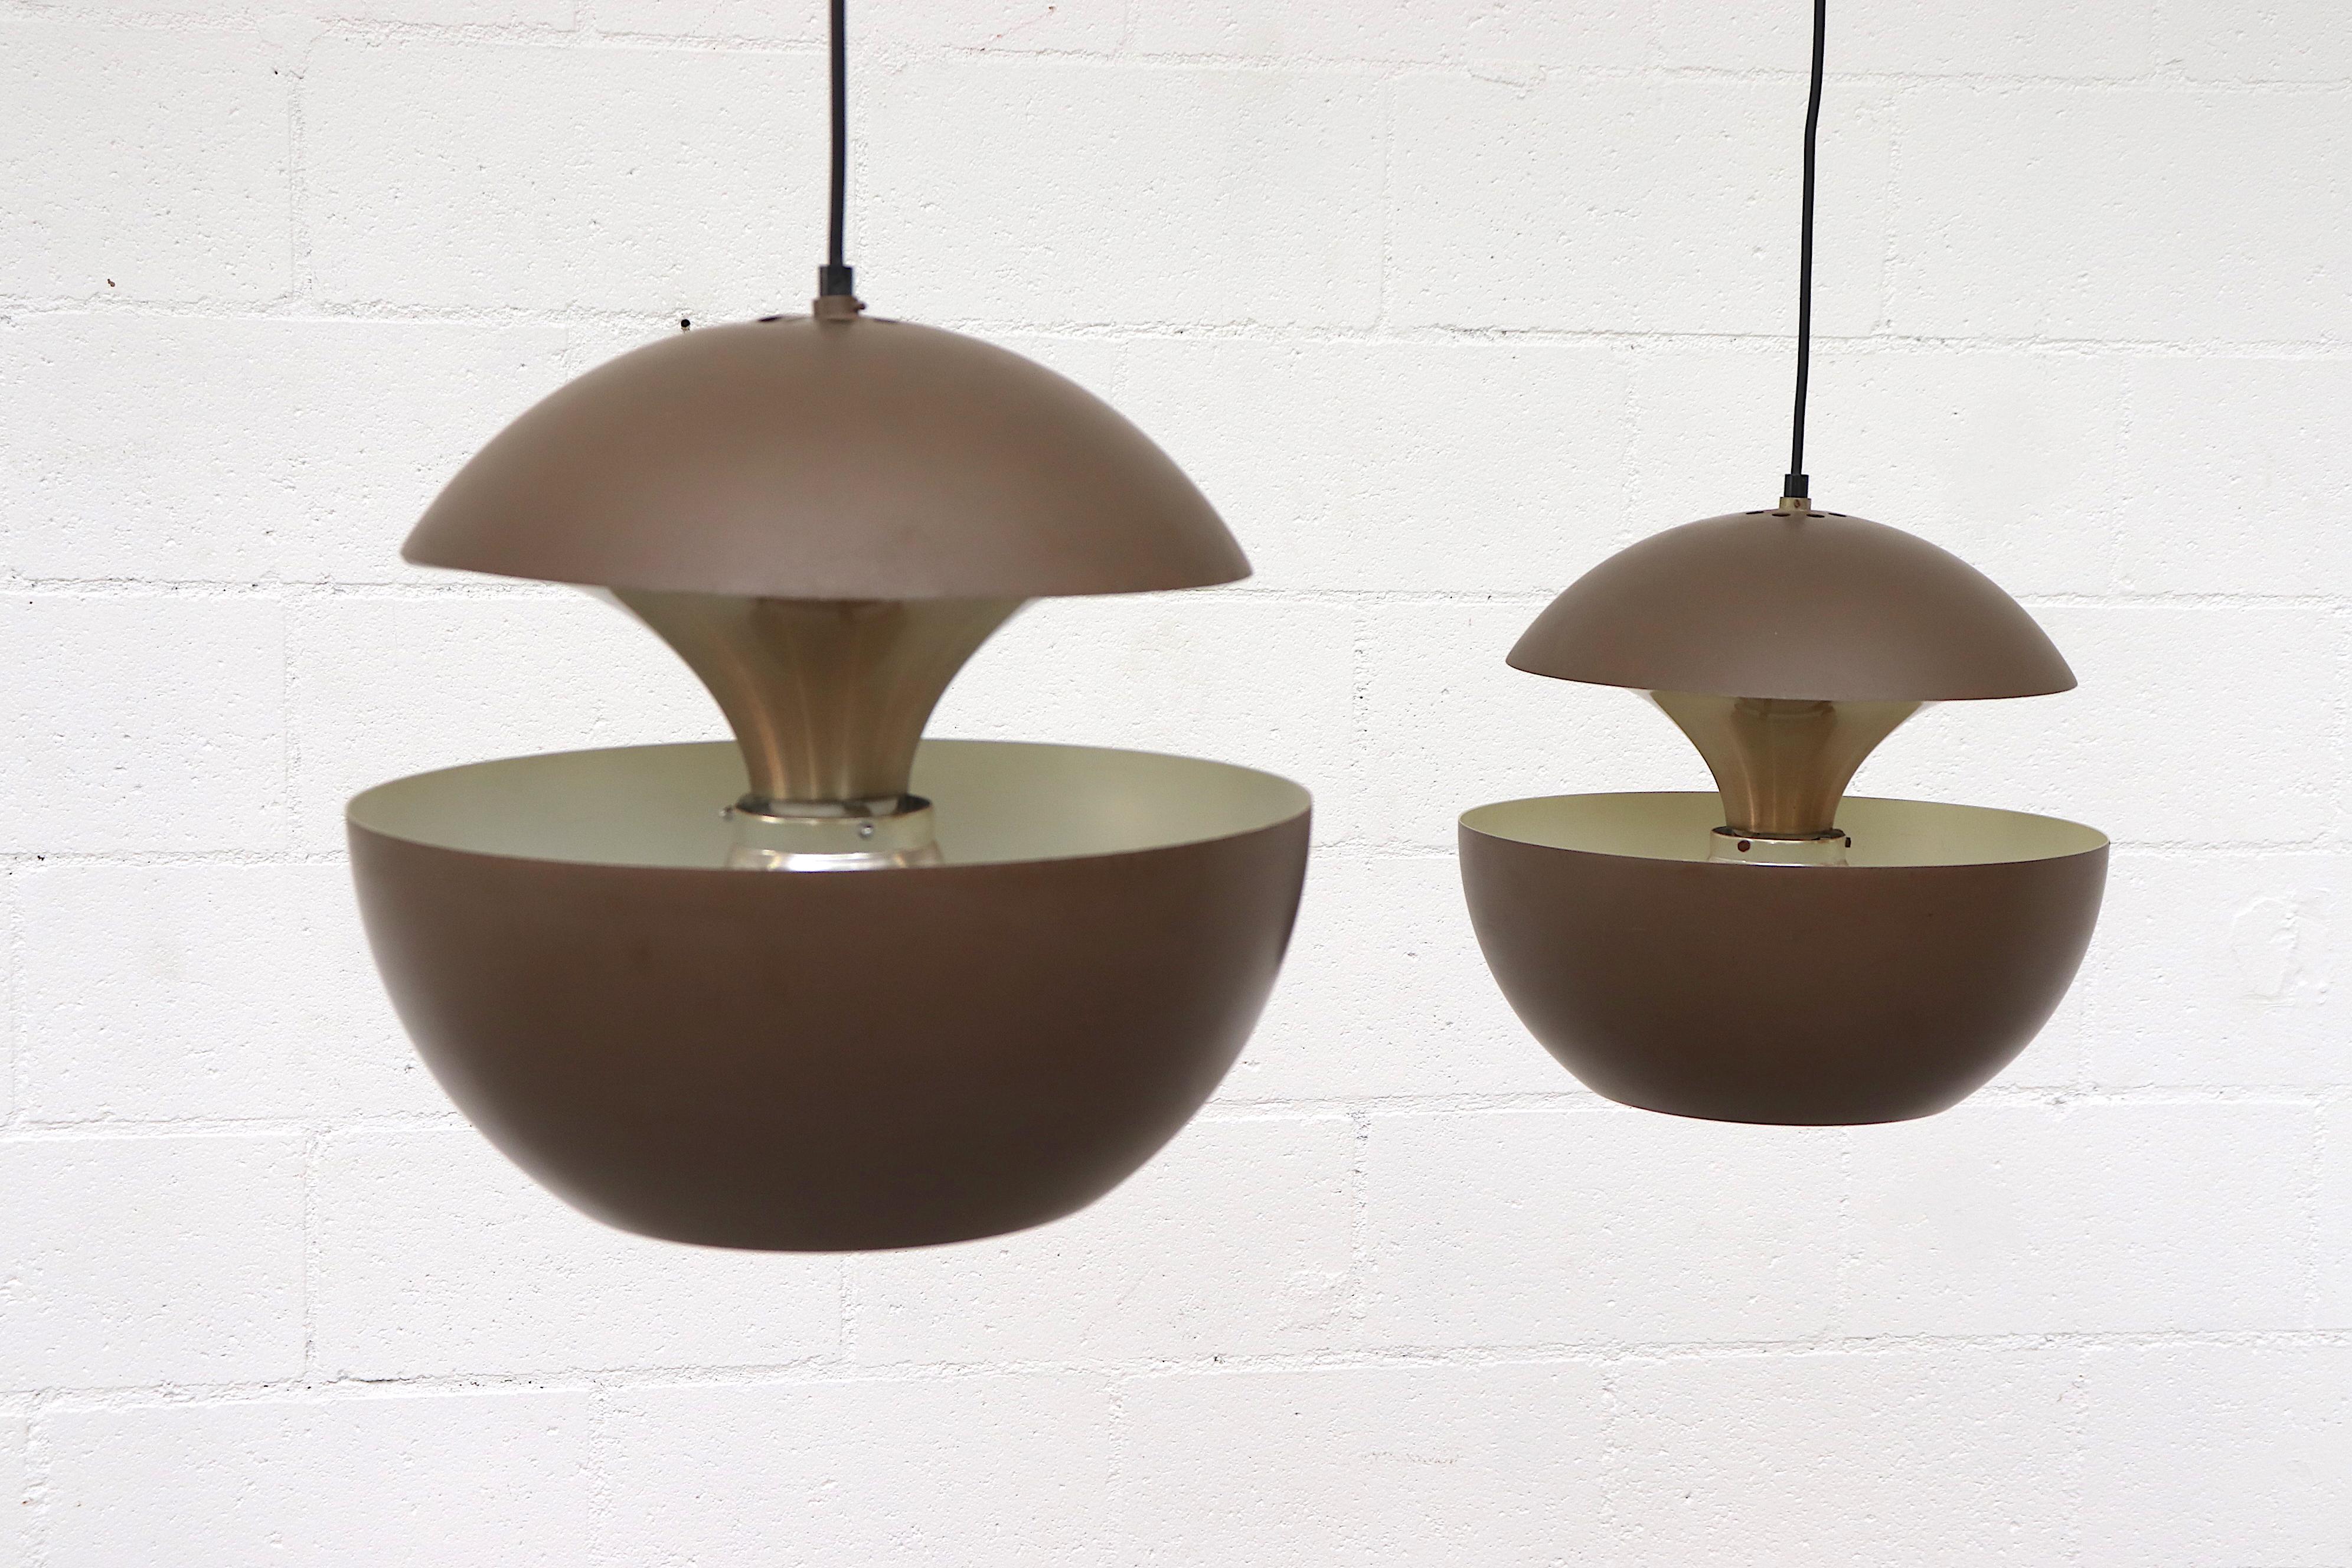 RAAK 'Springfontein' ceiling pendant with brown enameled aluminum shade on aluminum hardware with sleek modern design. In overall good original condition with visible wear and scratching consistent with age. May have some denting. Individually